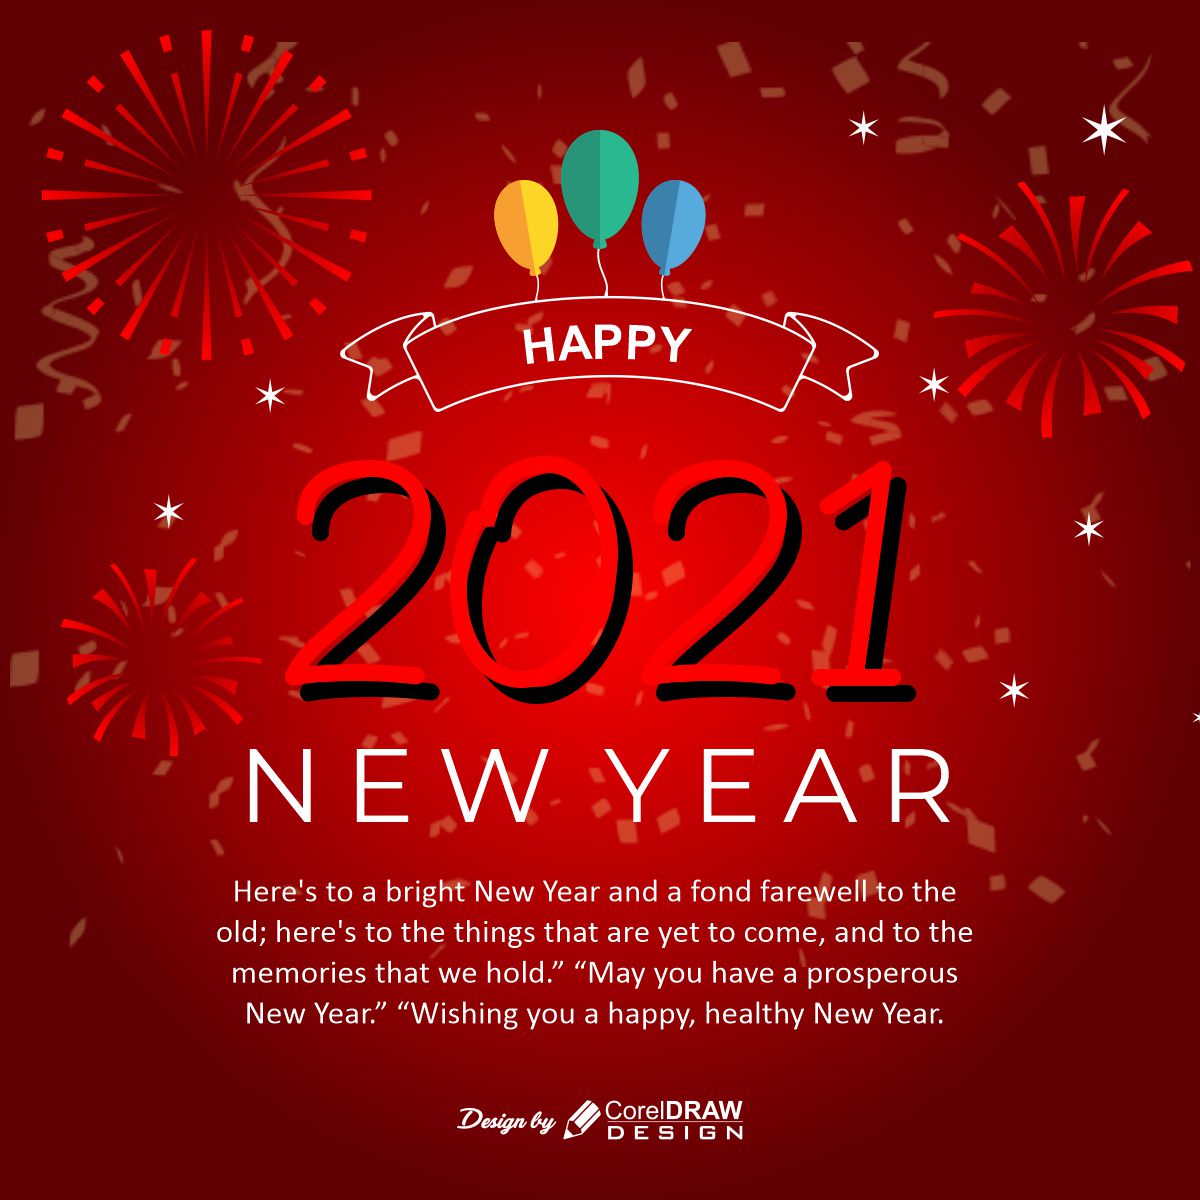 Happy new year 2021 Red template